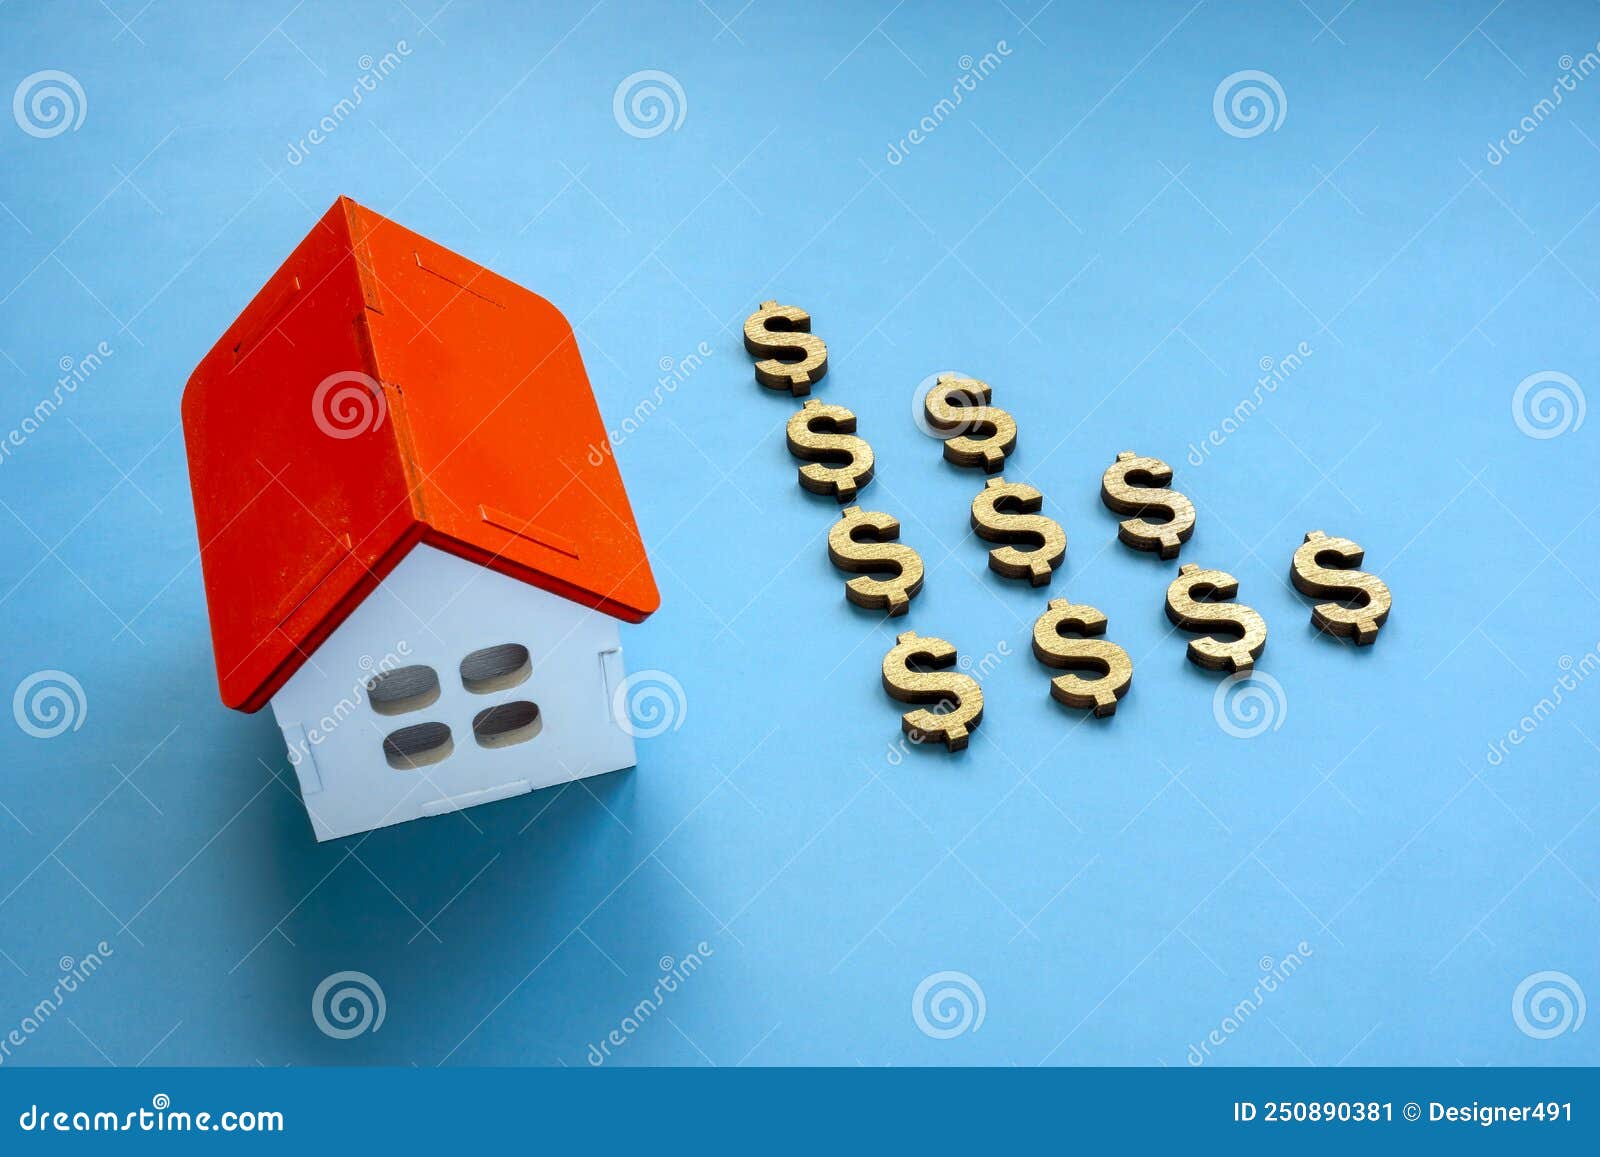 house model and dollar signs. reverse mortgage concept.